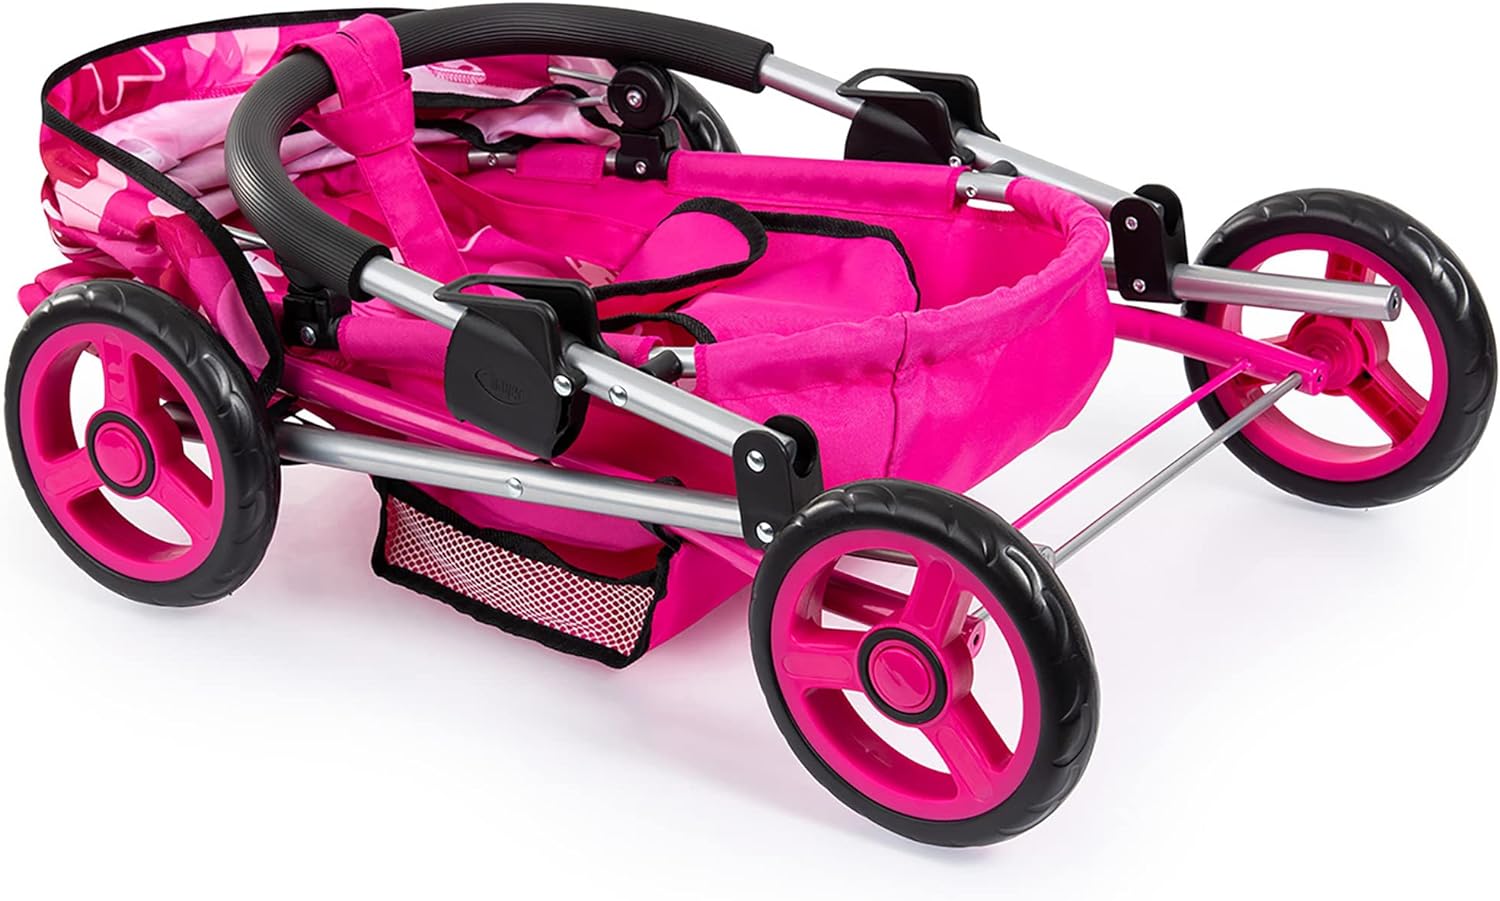 Baby Doll Stroller Pram for Toddlers, Foldable with Bag and Blanket, Modern Pink with Stars - SILBERSHELL